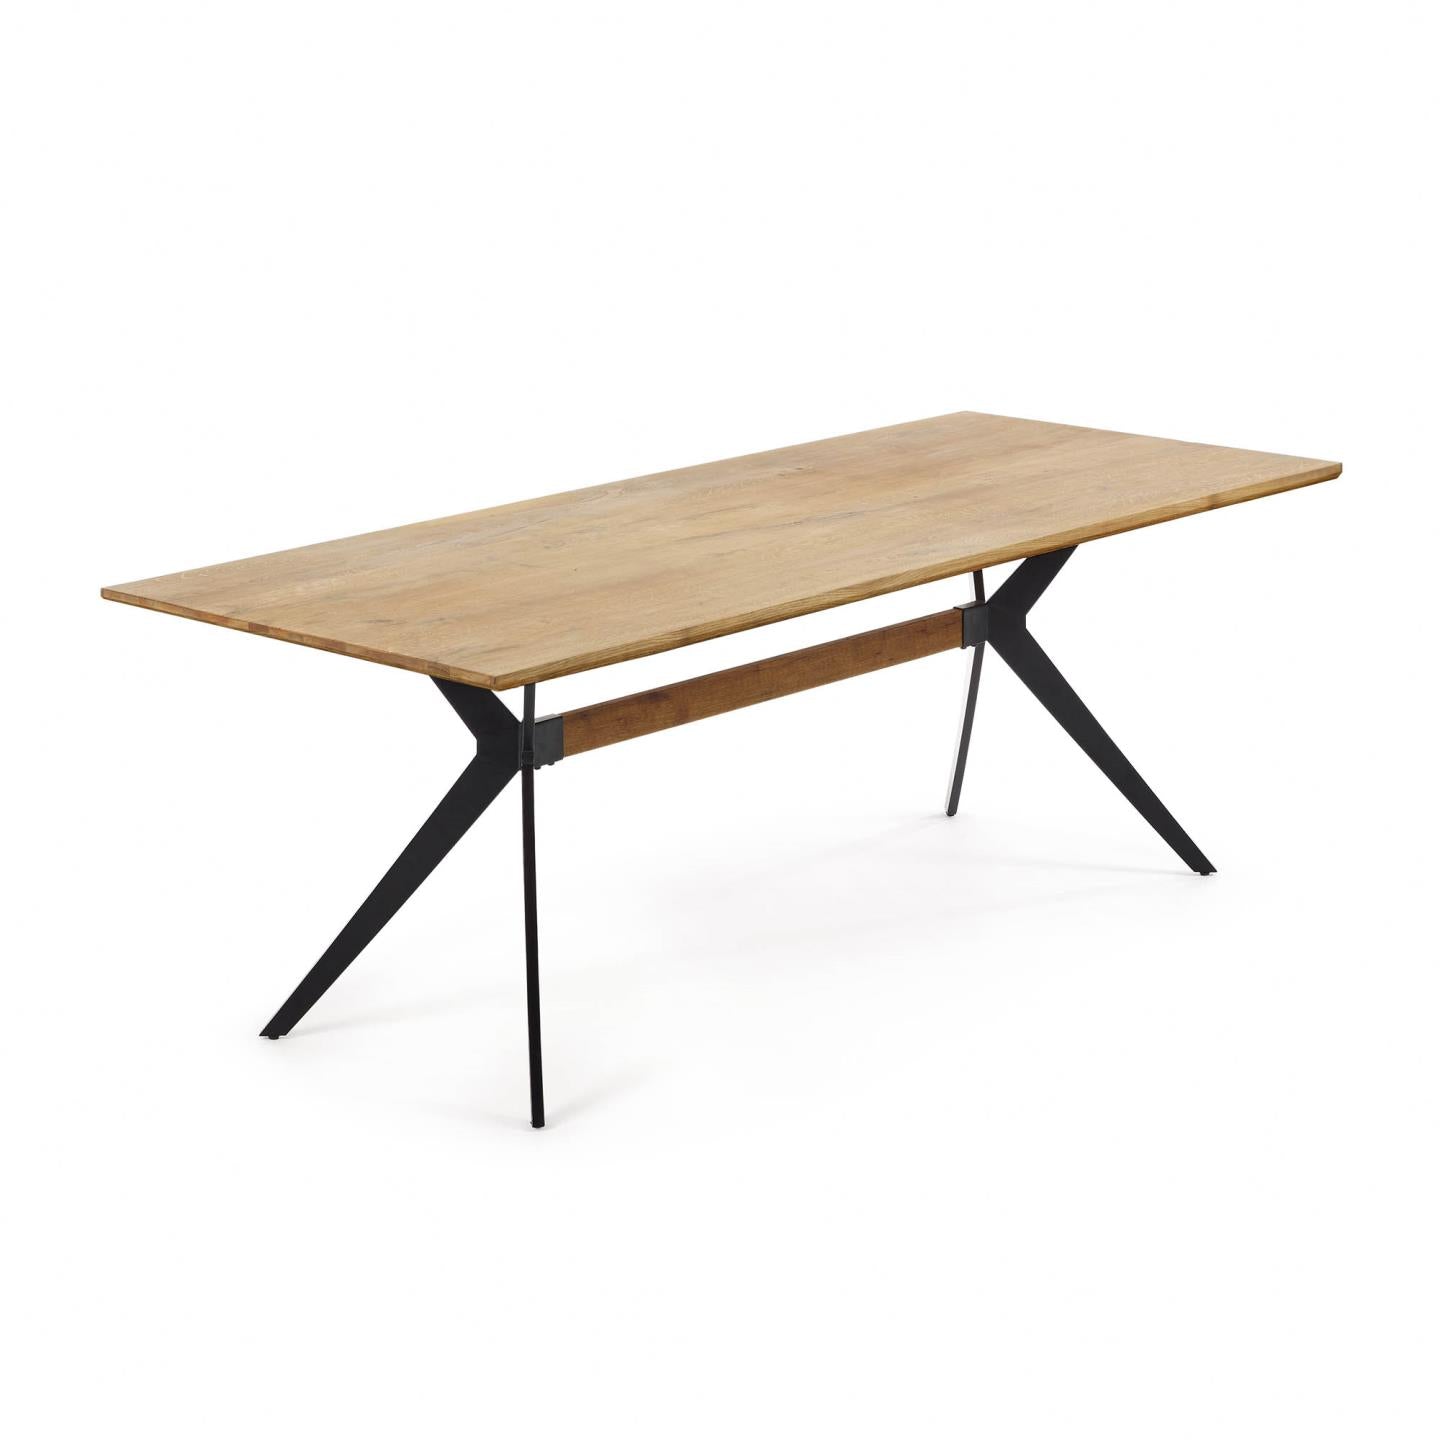 Amethyst oak veneer table with a distressed finish and black steel legs, 160 x 90 cm